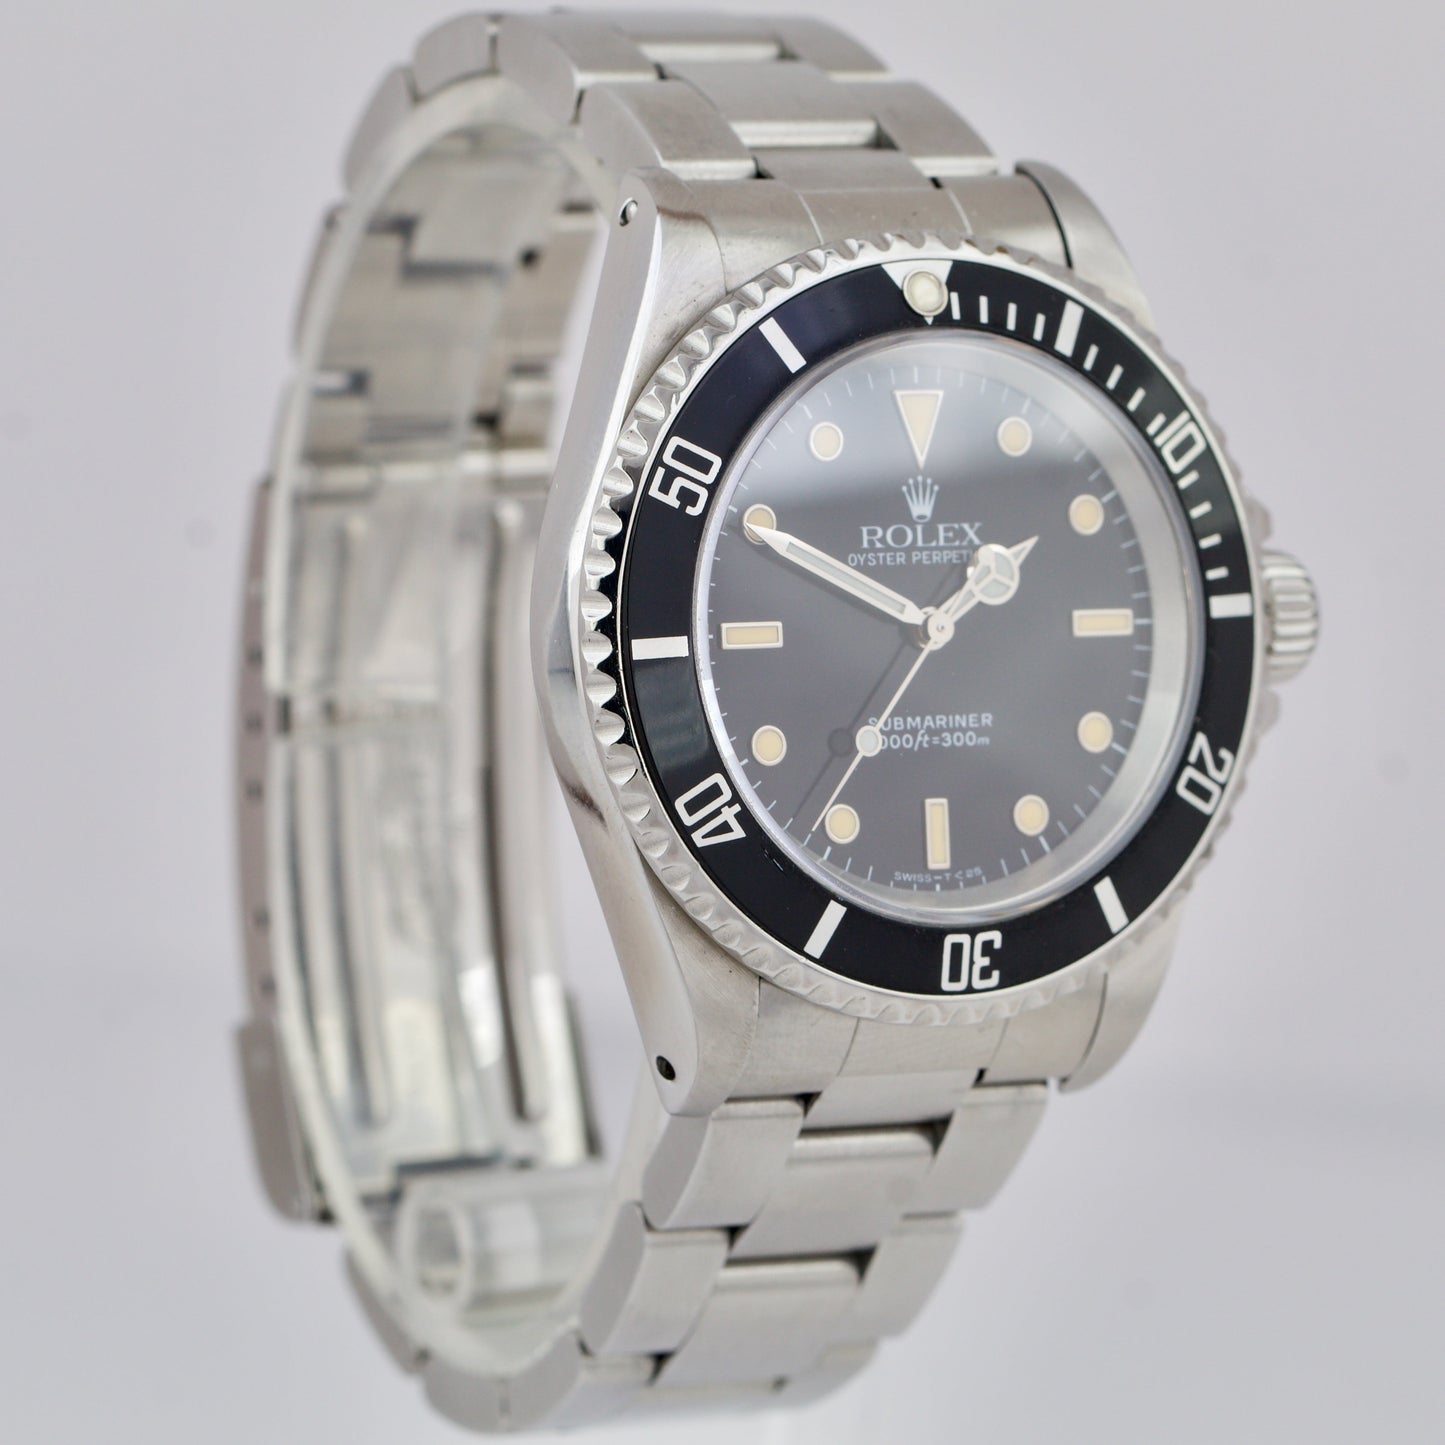 Rolex Submariner Black No-Date Patina Stainless Steel Automatic 14060 40mm Watch